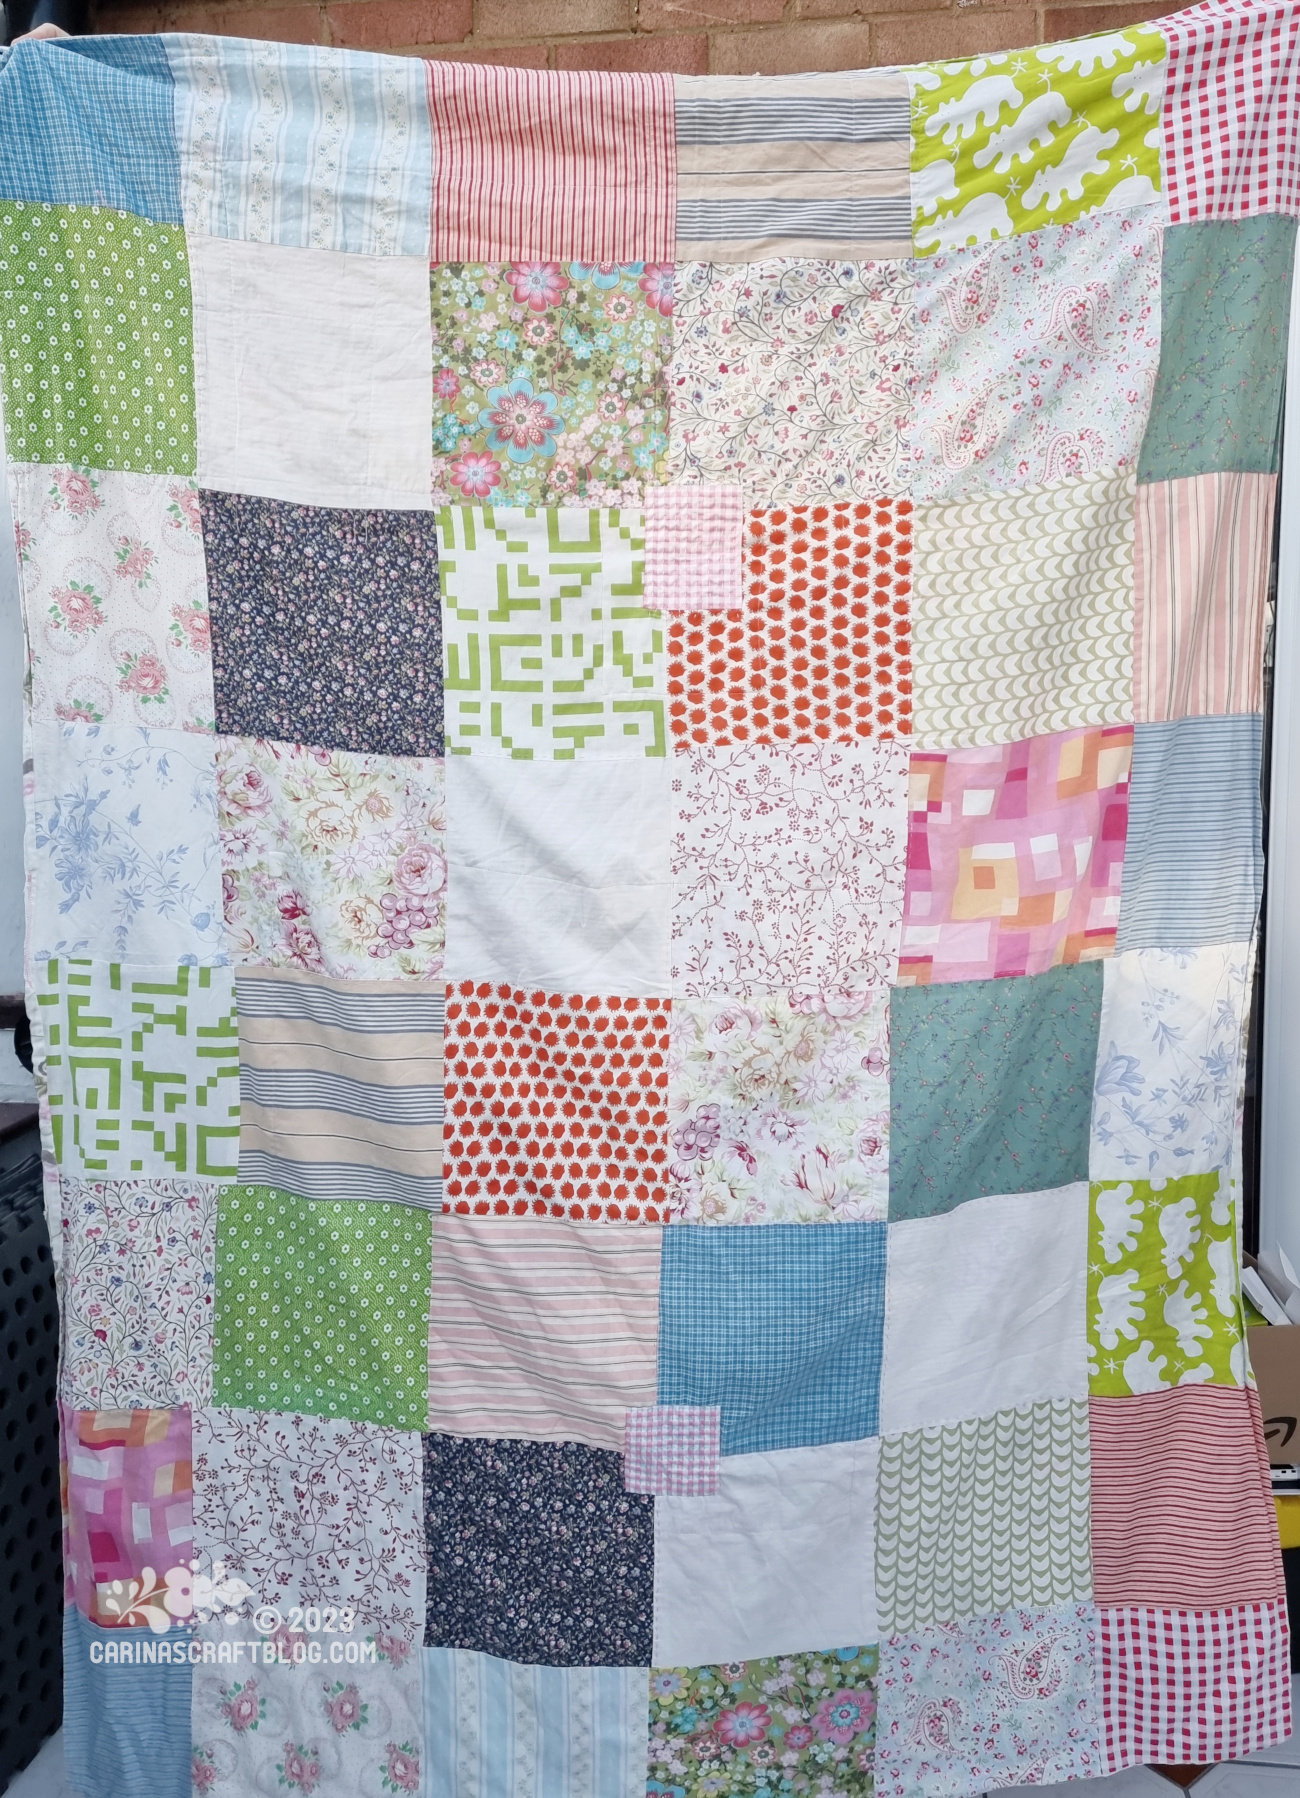 The front of a fabric blanket made up of square patches in different colours and patterns, mostly red, green, blue and taupe colours.